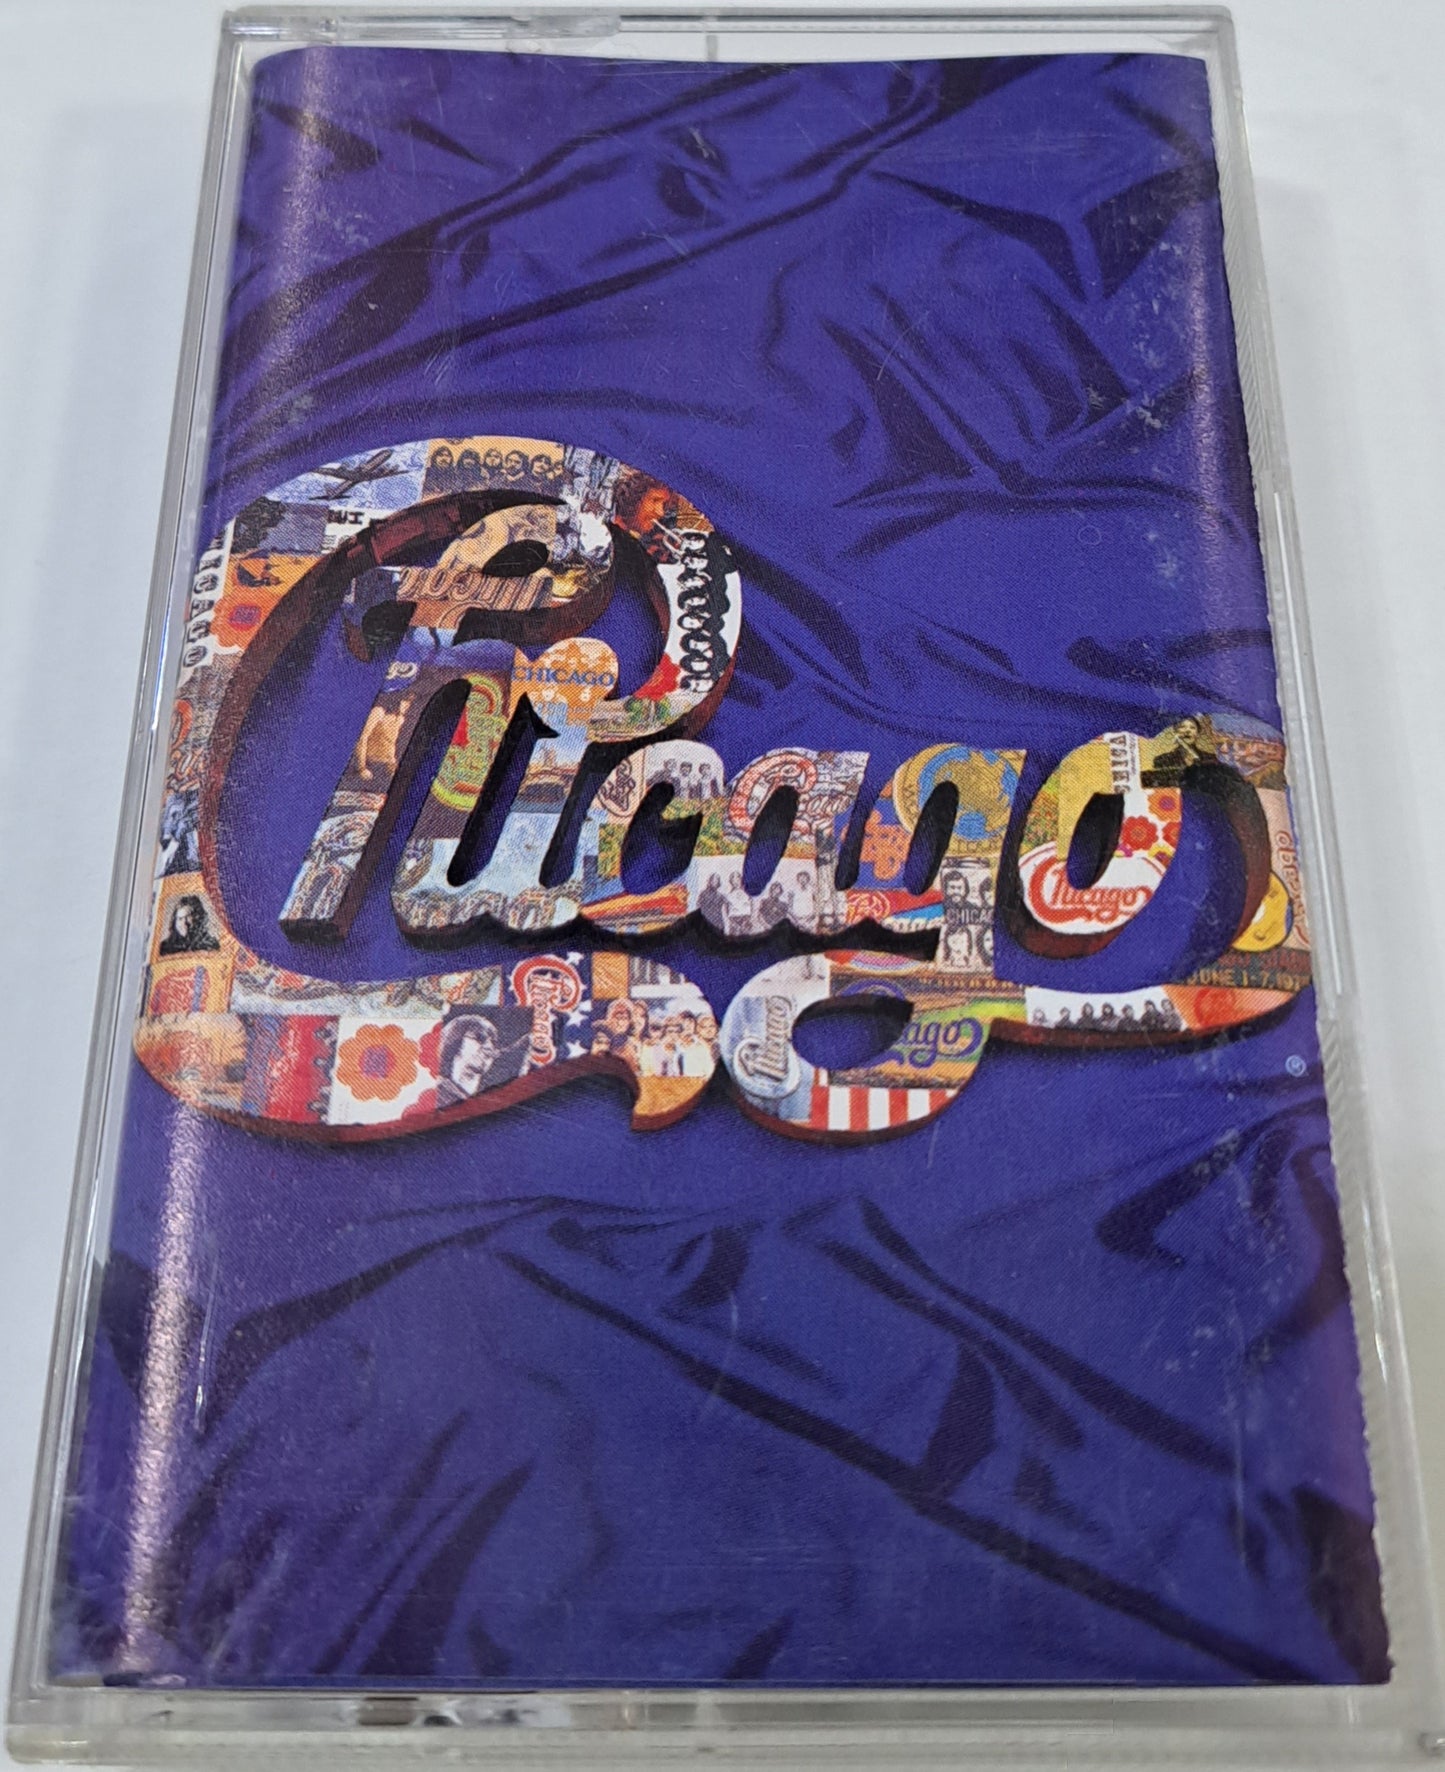 CHICAGO - THE HEART OF 1967-1998 VOL II CASSETTE